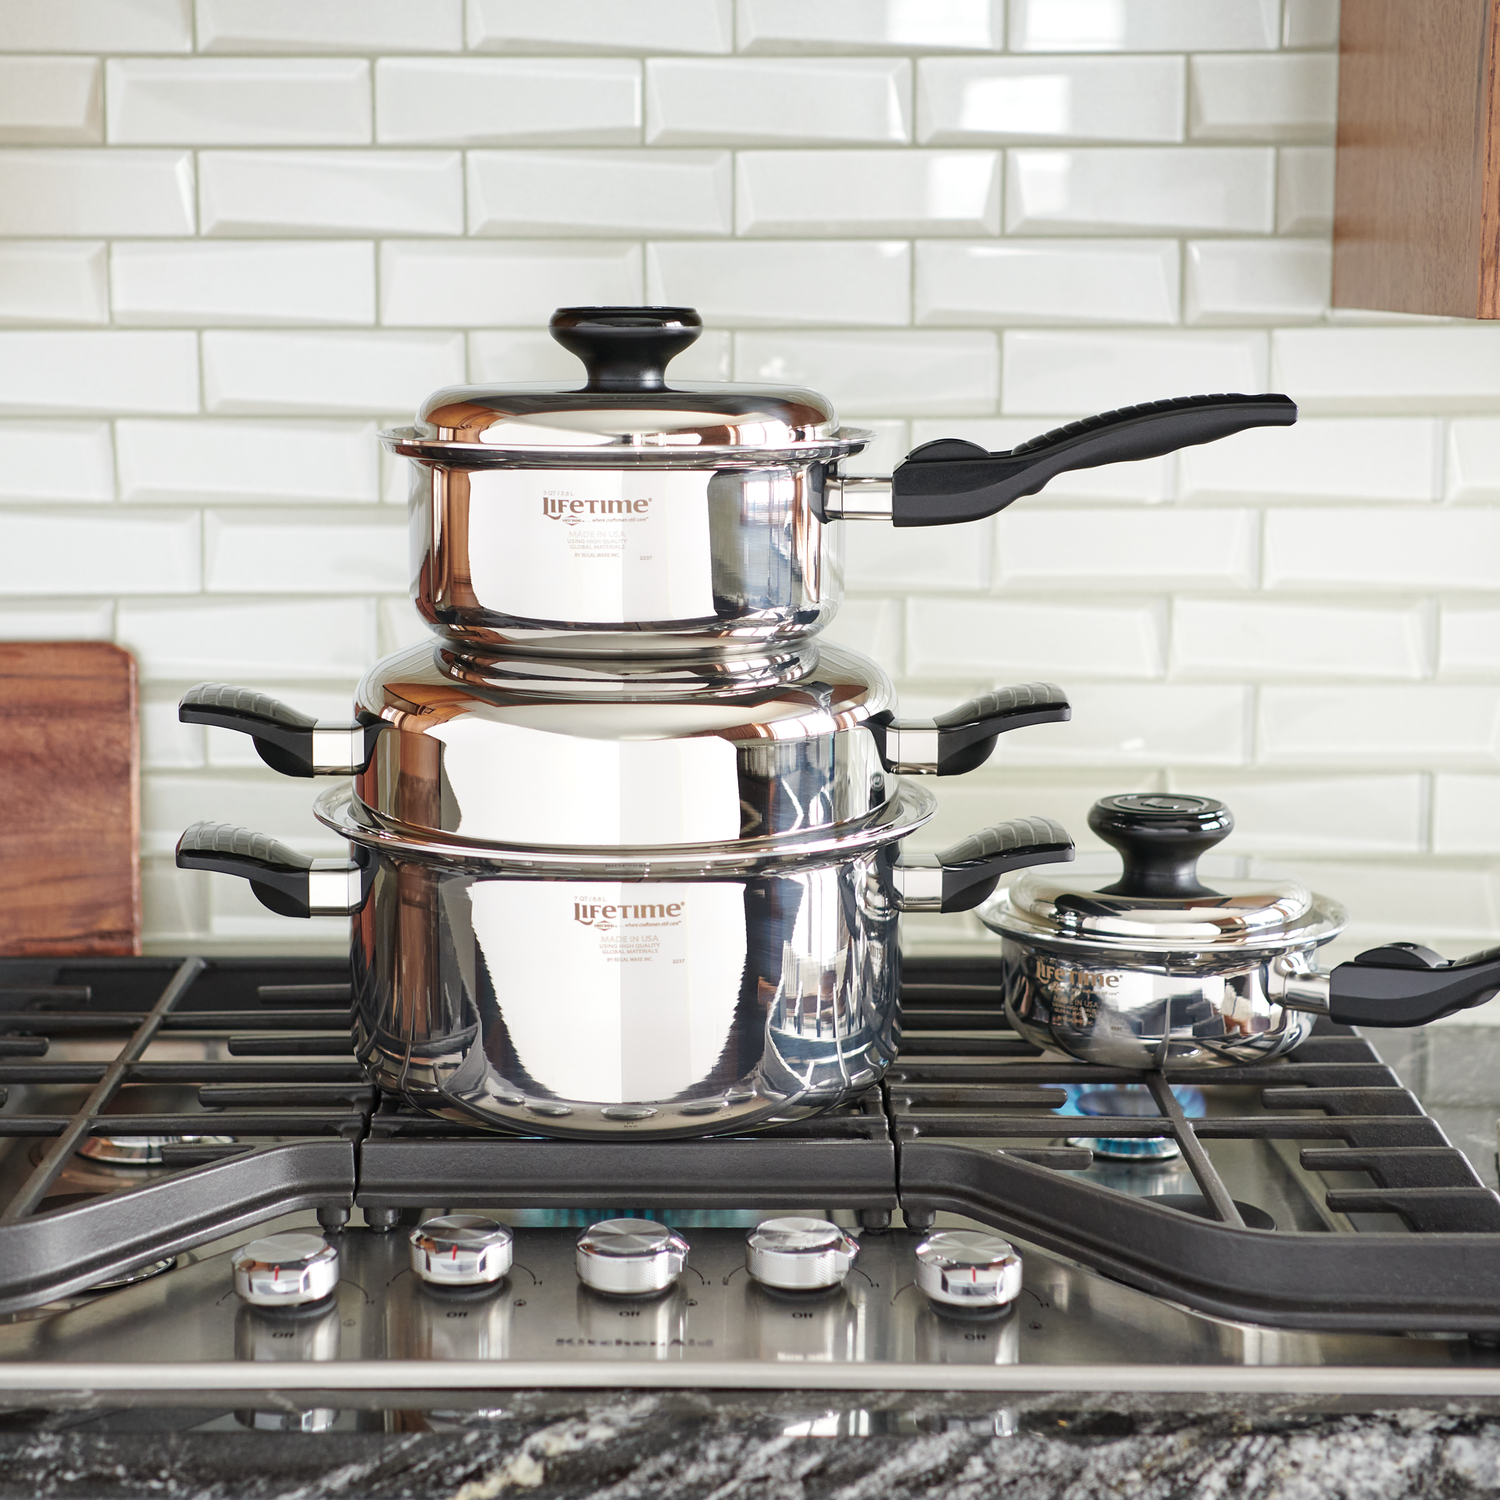 Regal Ware American Kitchen TriPly Stainless Steel Make Enough for Lef -  Kitchen & Company